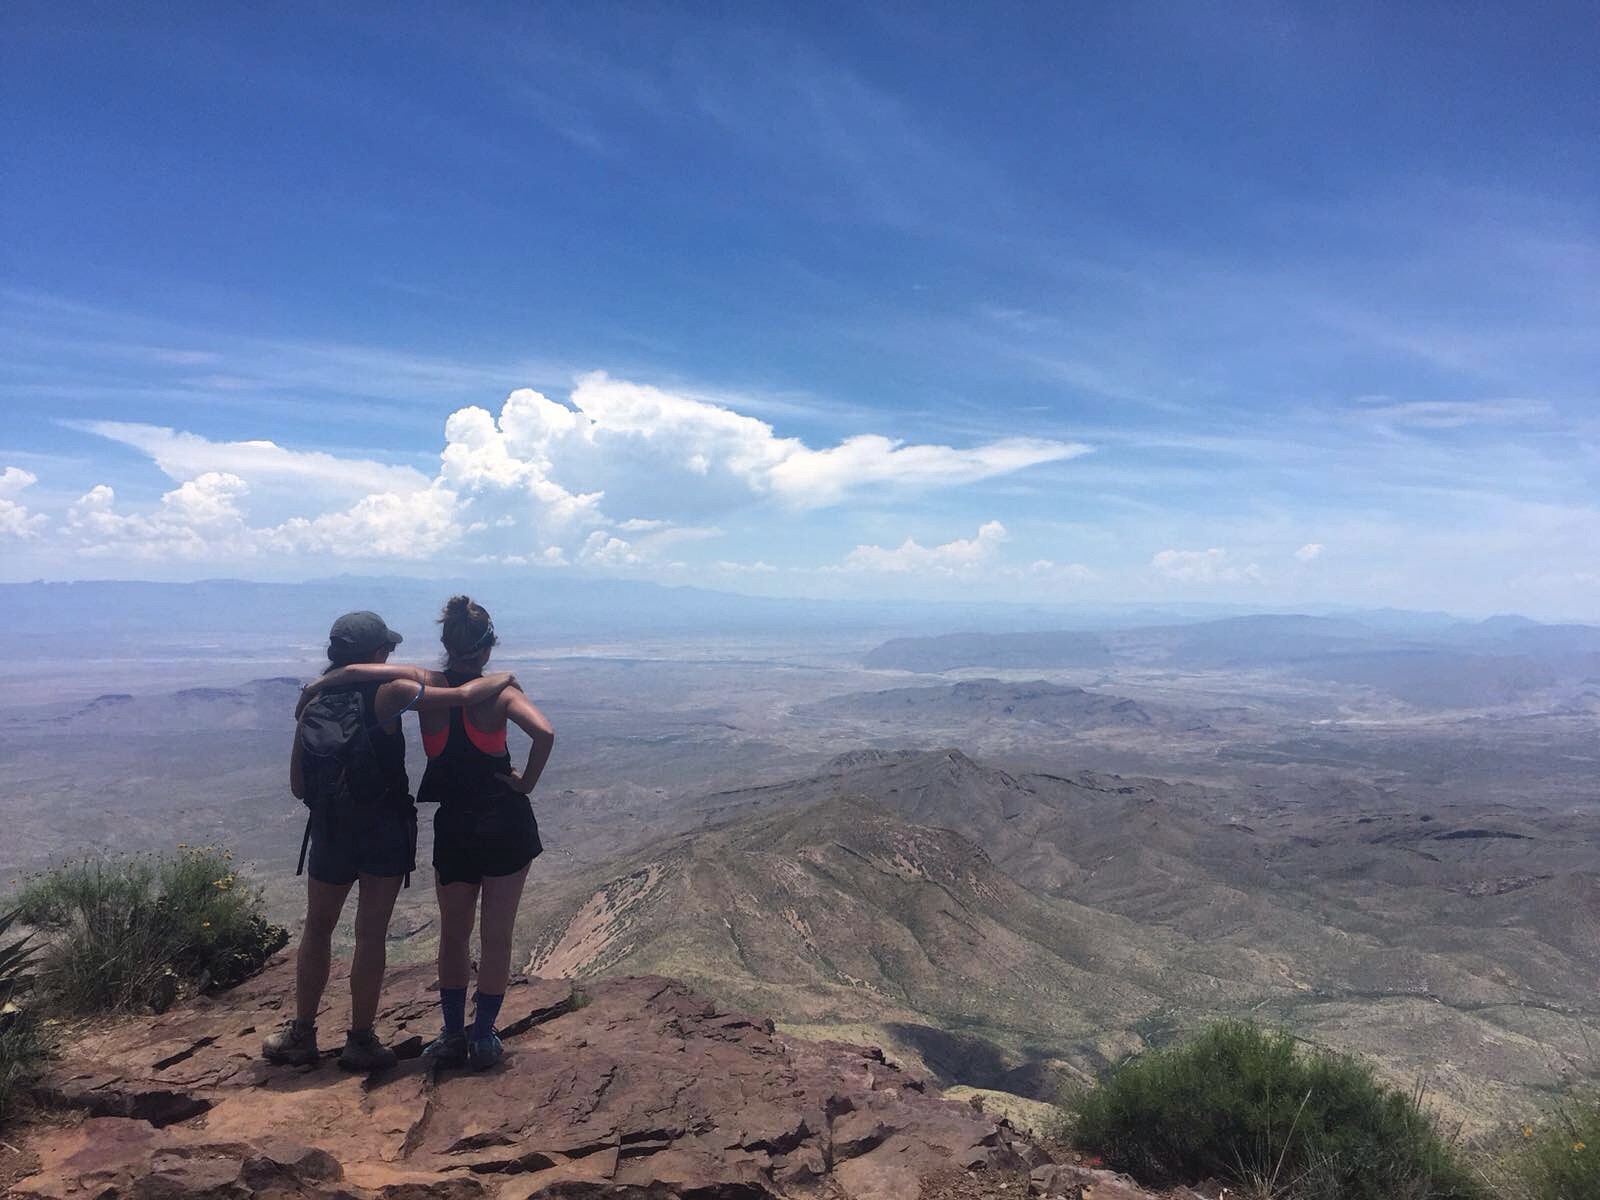 Ciara and Meg overlooking the Big Bend landscape.